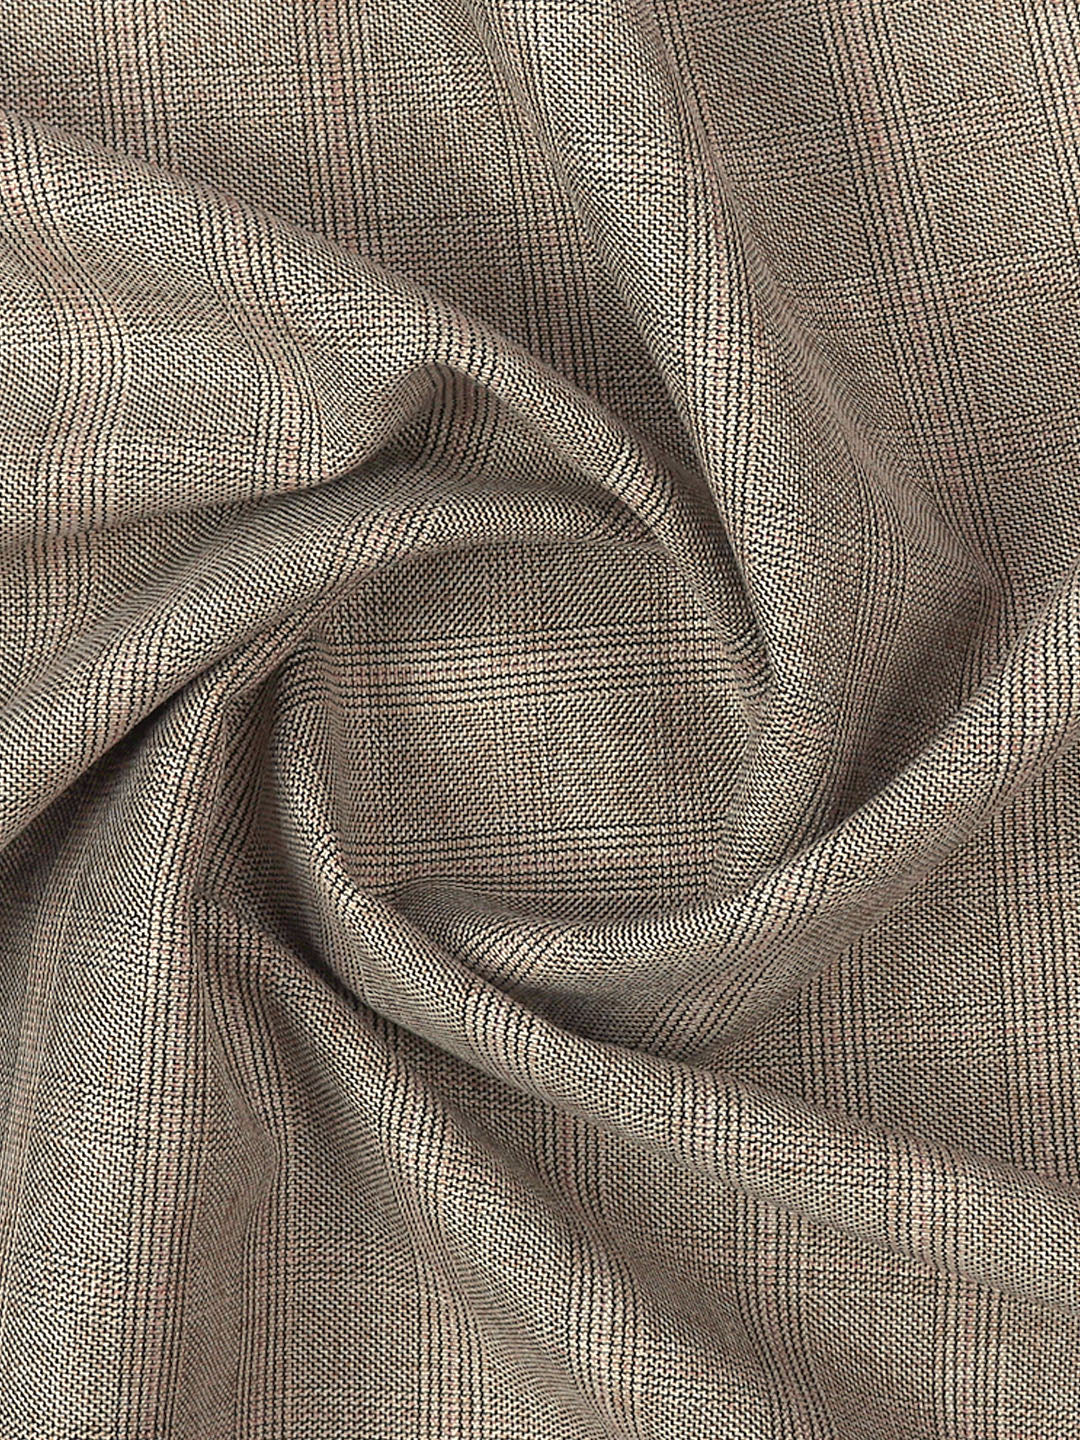 Cotton Smart Look Checked Brown Suiting Fabric-Enable Stretch